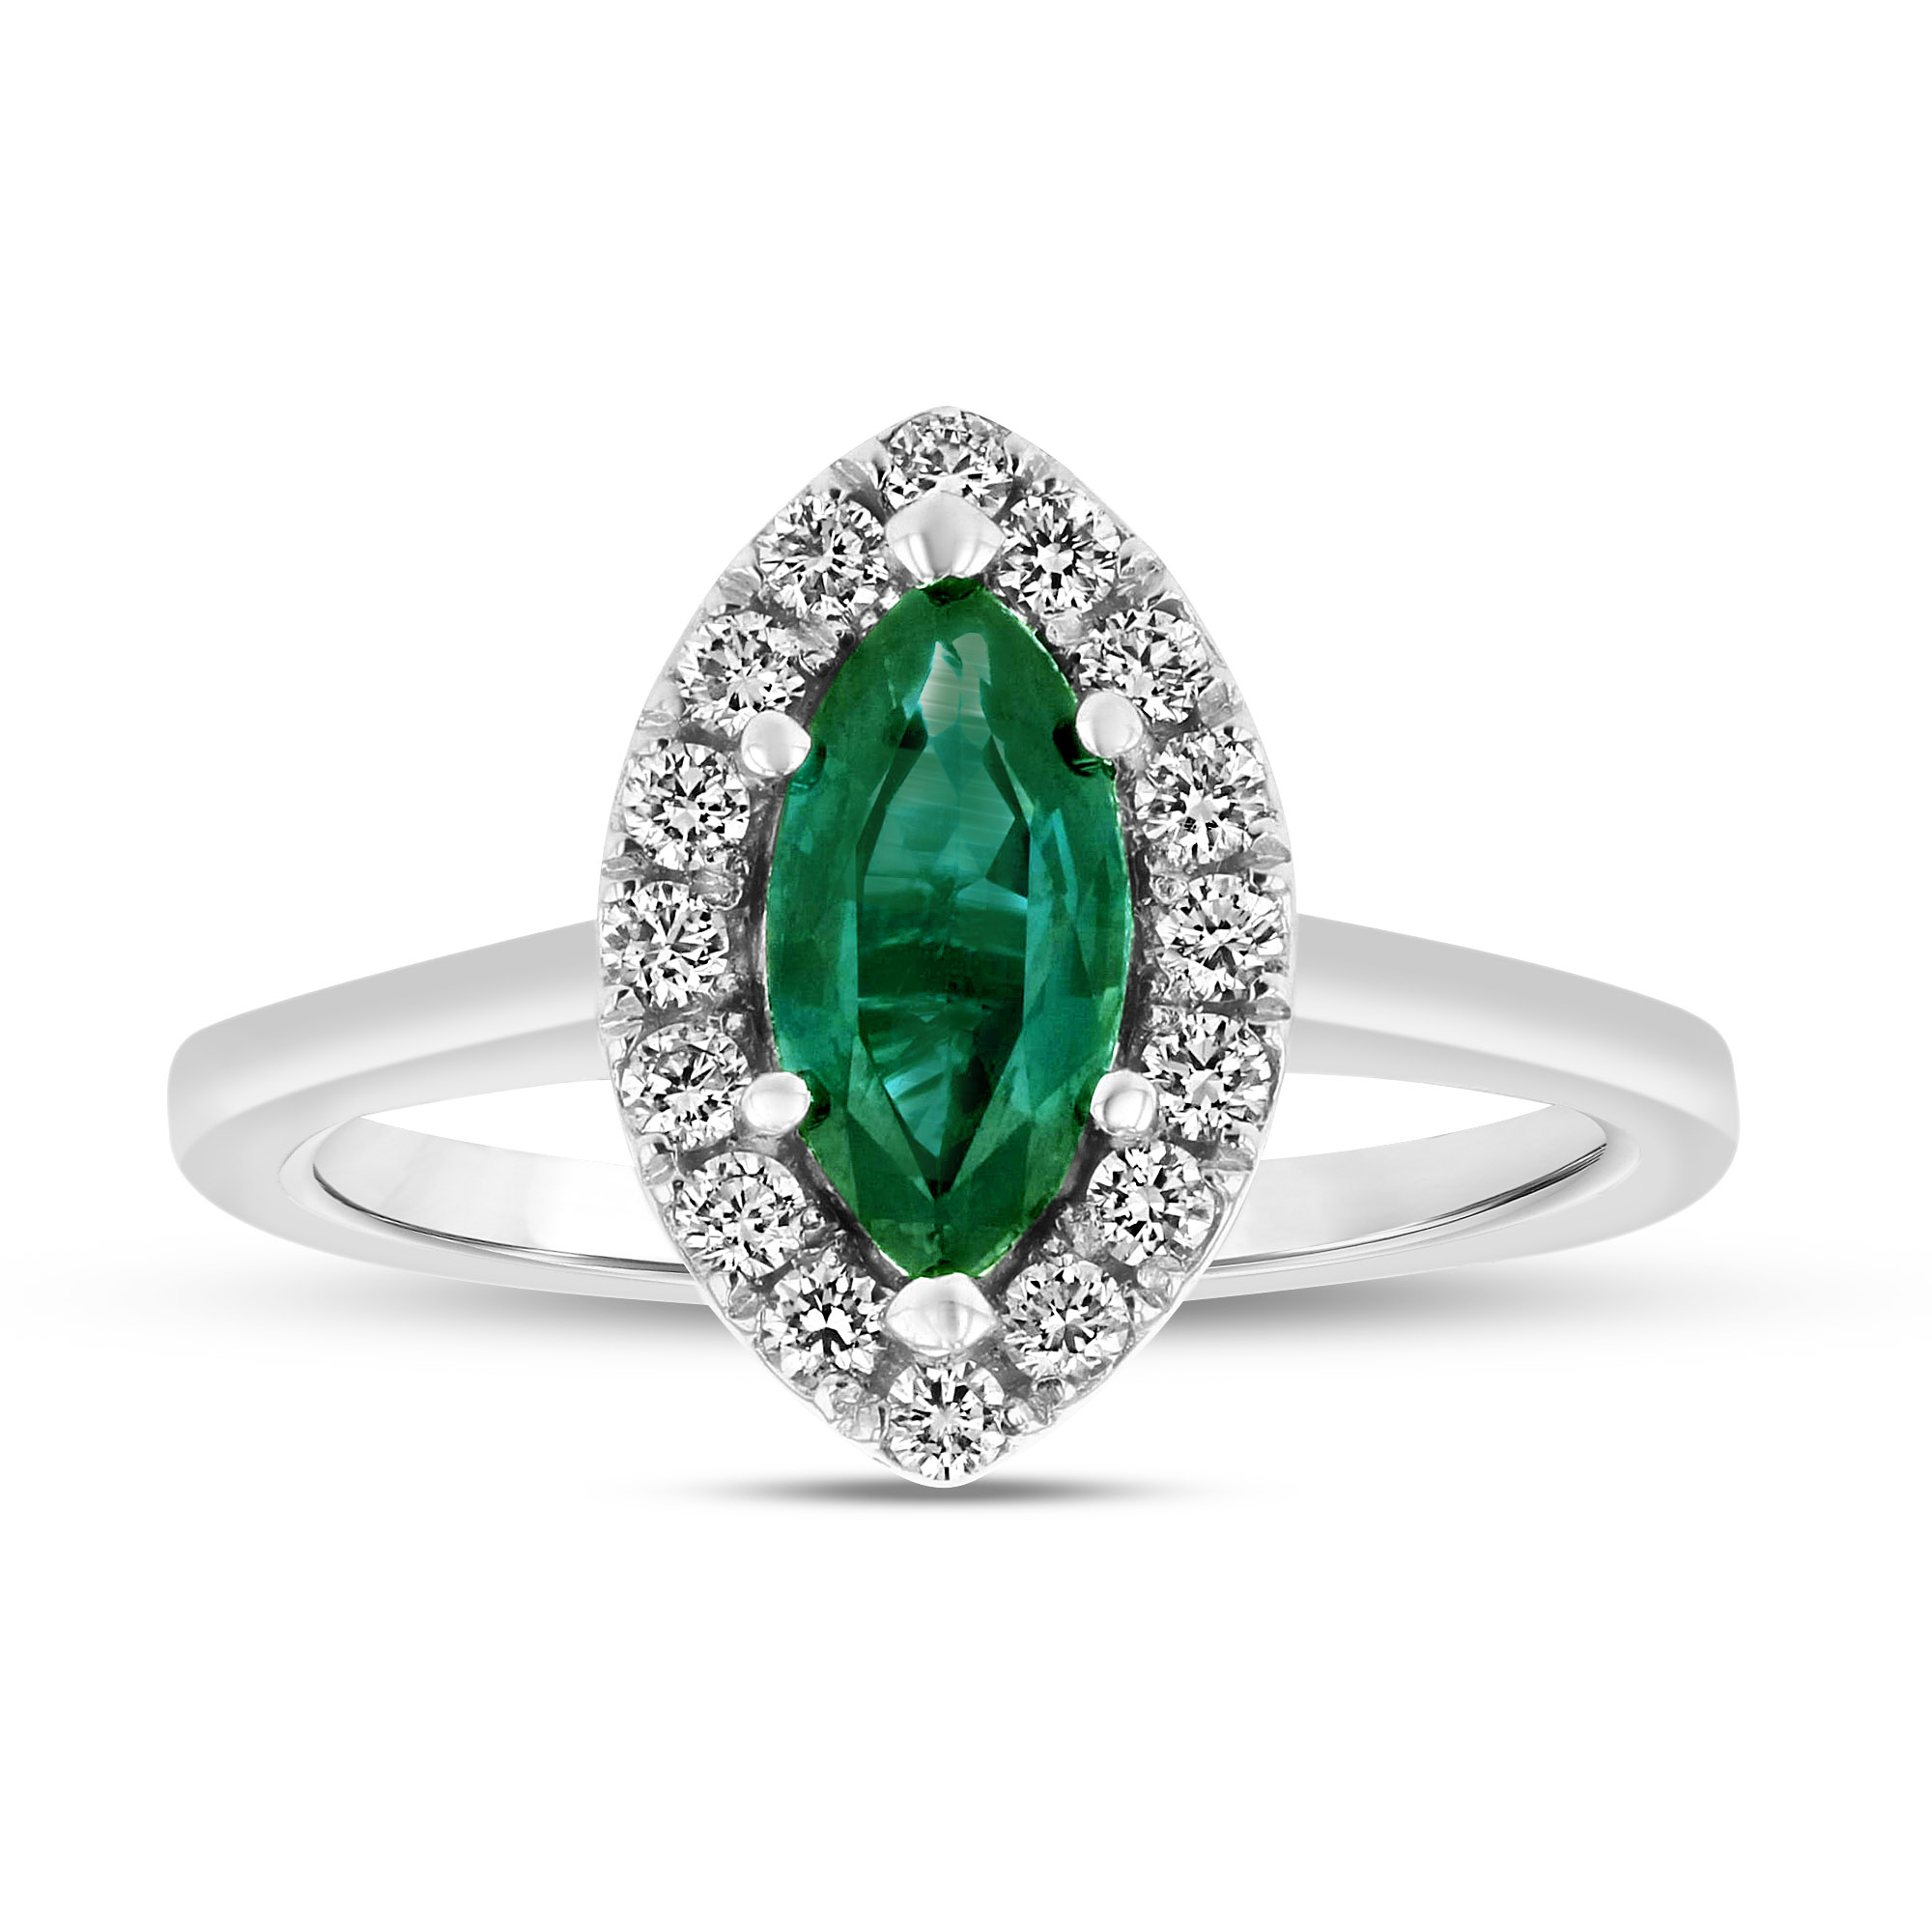 View 1.37ctw Diamond and Emerald Ring in 14k White Gold